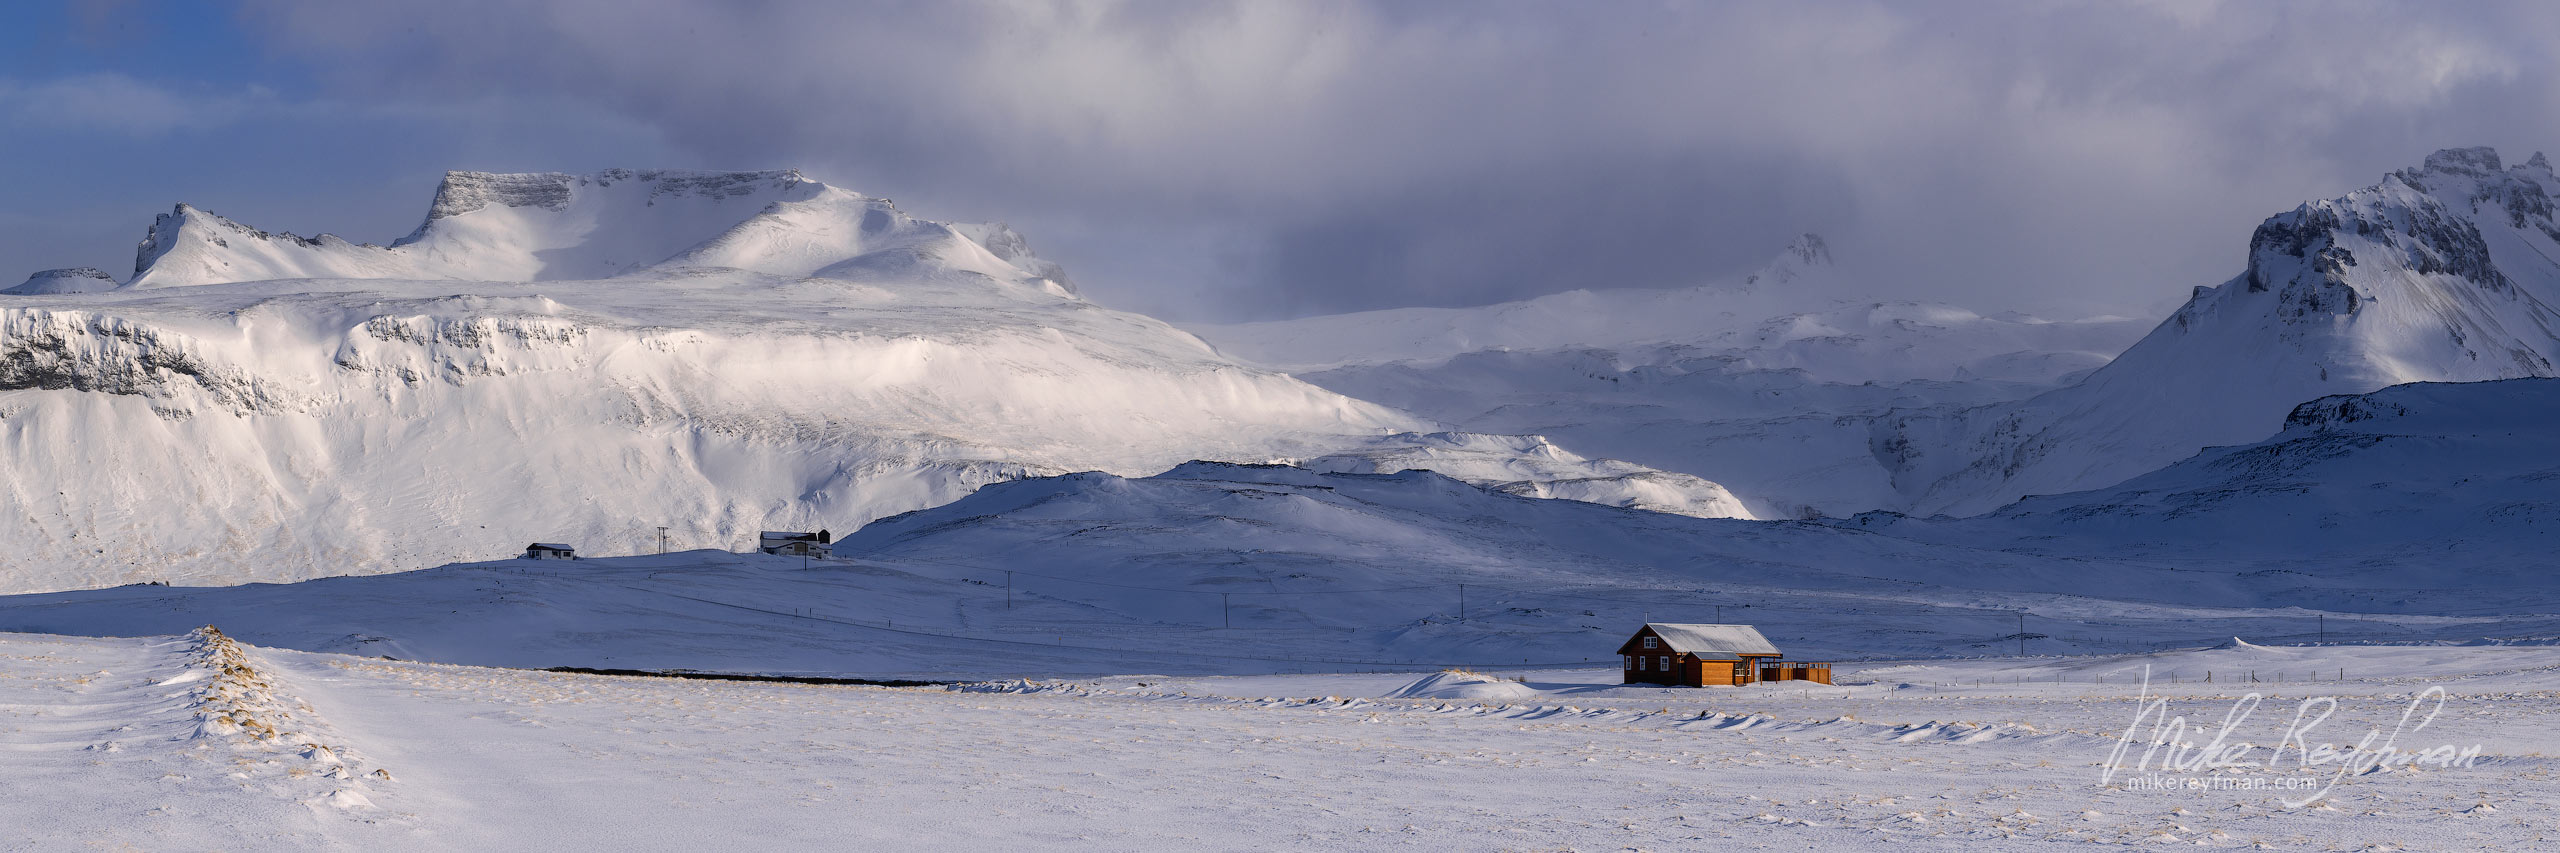 Winter landscape. Snaefellsness Peninsula, Iceland 109-IC-GP _D8E4381_Pano-1x3 - Rhyolite Mountains, Crater Lakes, Geothermal Areas, Lava Fields and Glacial Rivers. Iceland.  - Mike Reyfman Photography